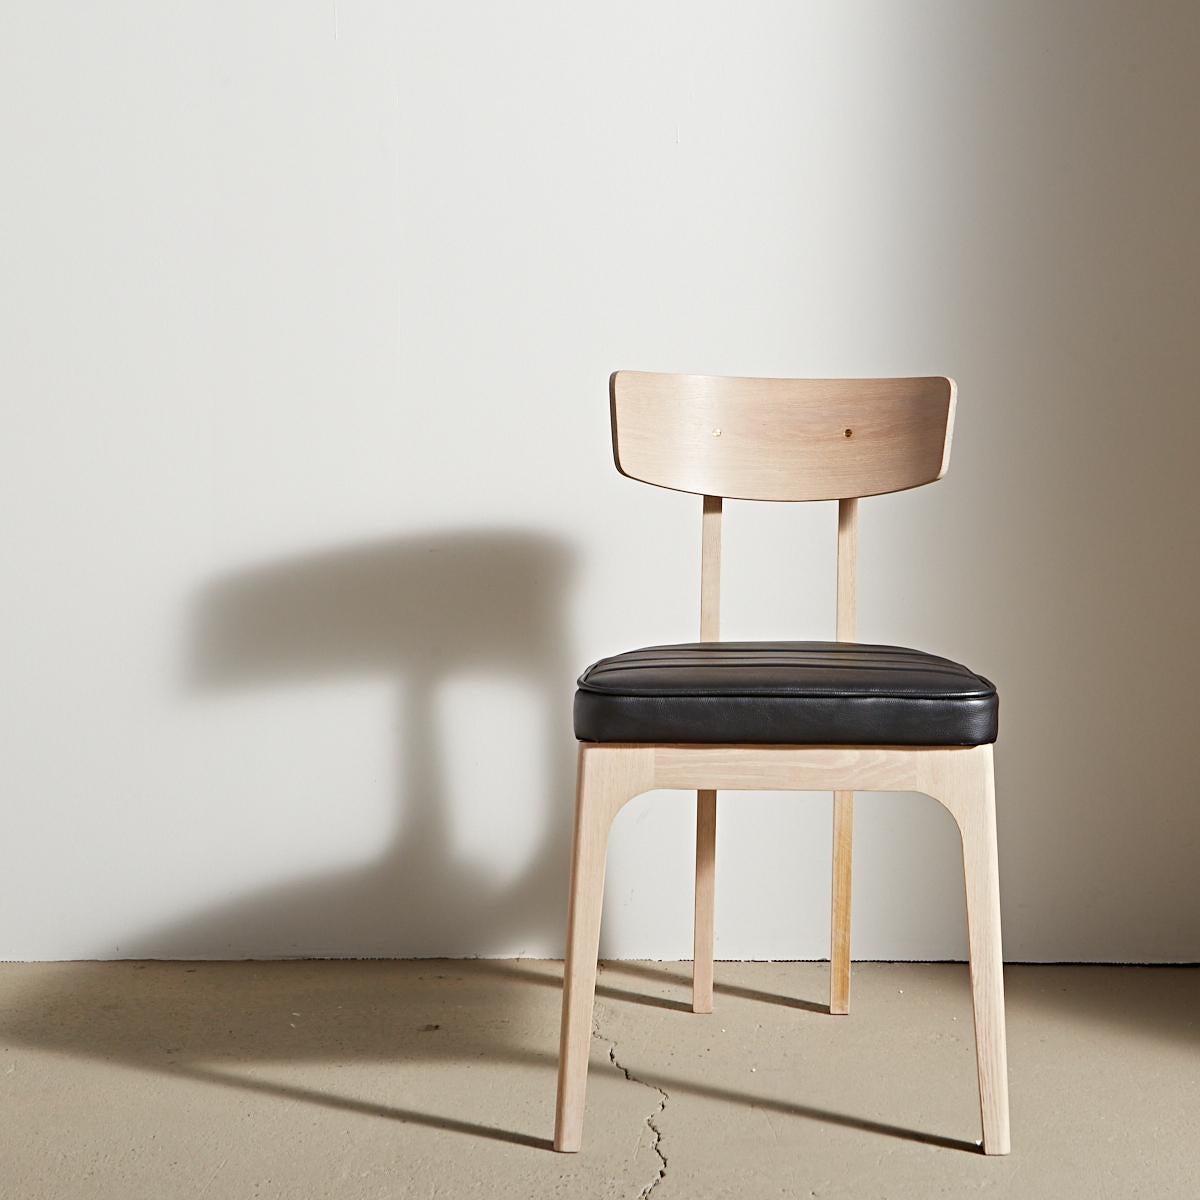 Unexpected angles provide an updated silhouette for a classic hardwood dining chair. Inspired by the European glamour of a Cafe Racer motorcycle, it has a strength and stability that defies the elegance of its slim legs. Featuring a bent solid